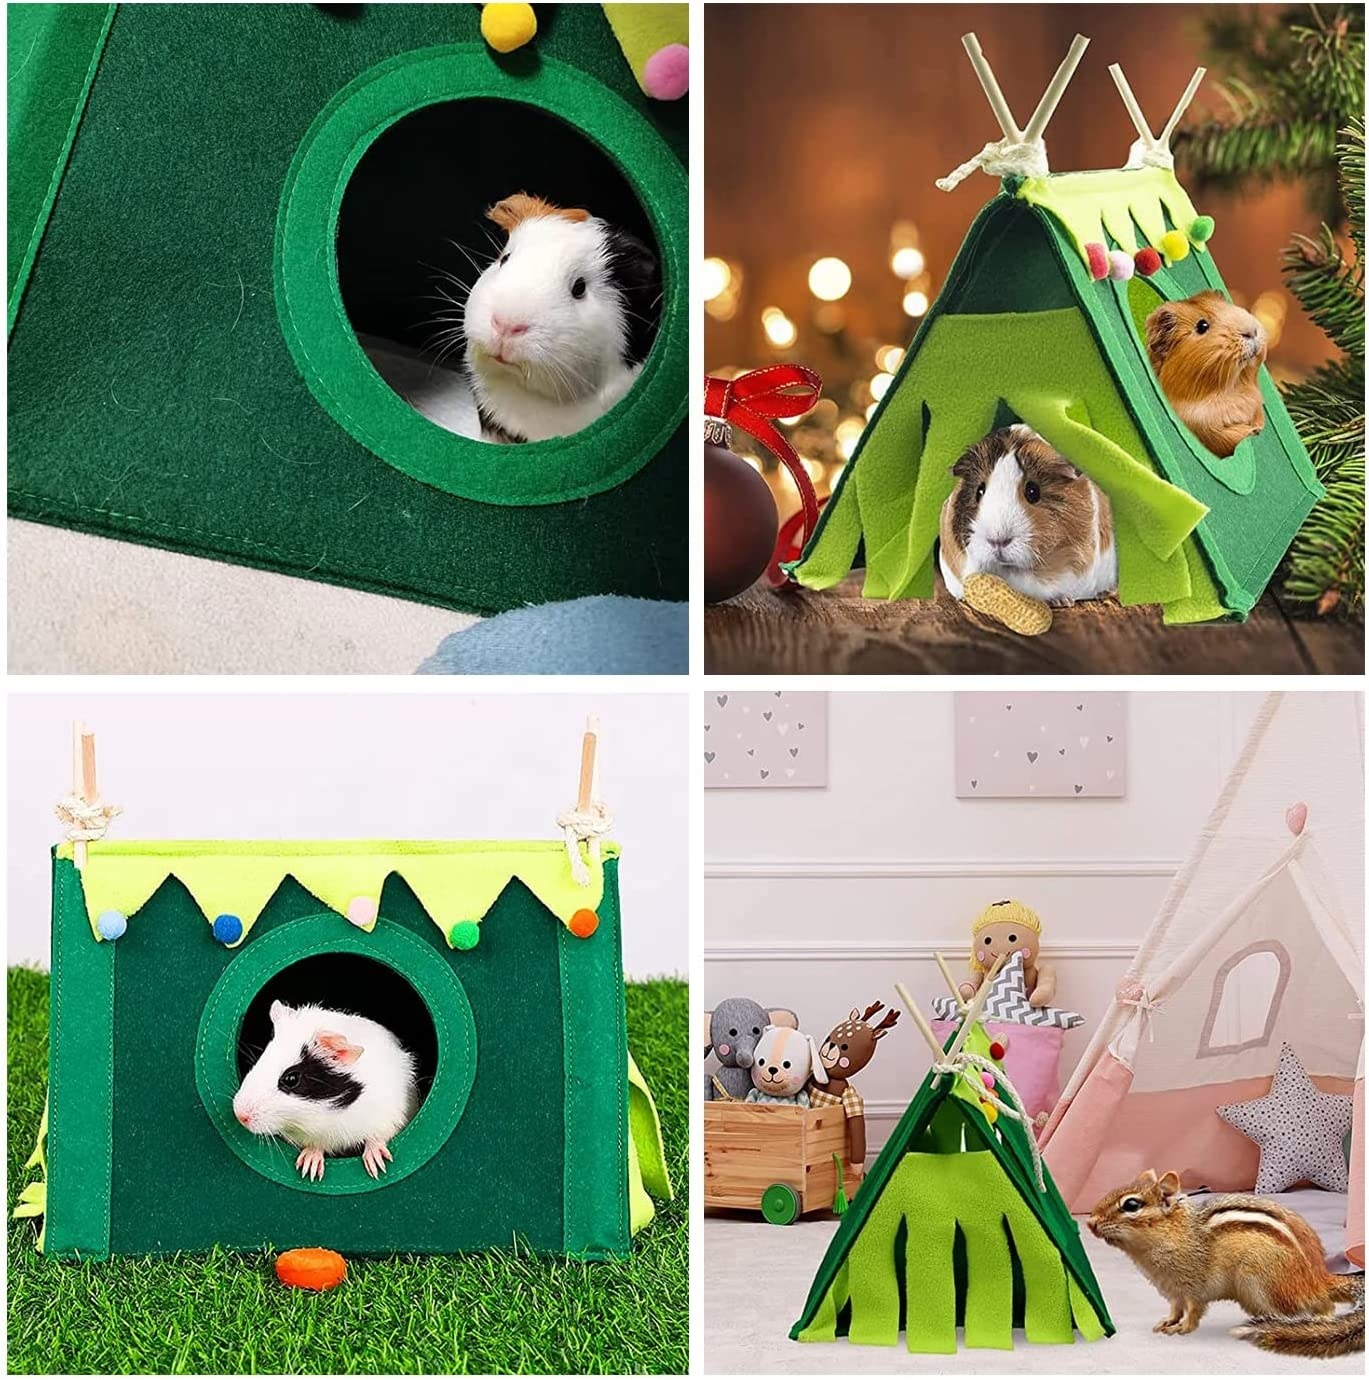 Critters playing in a felt tent